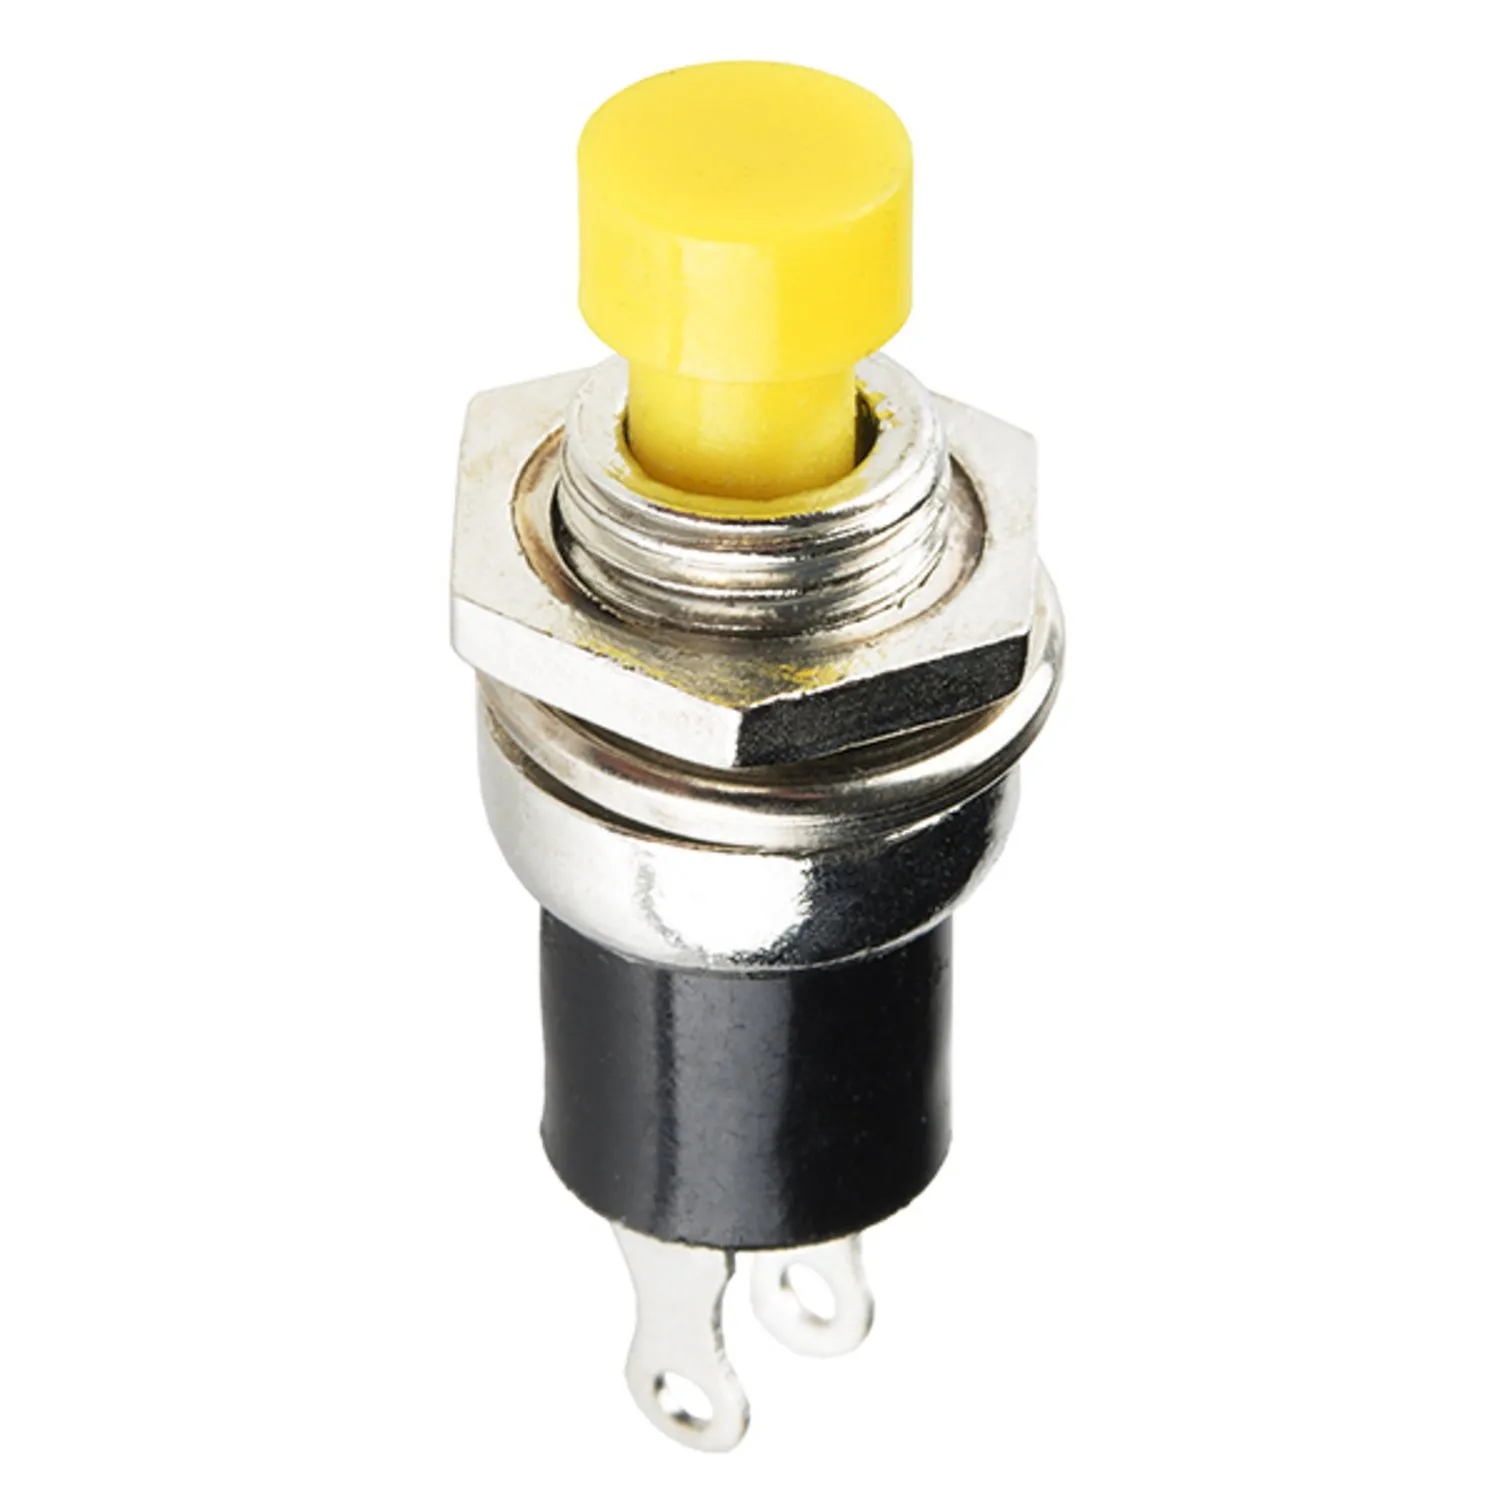 Photo of Momentary Button - Panel Mount (Yellow)